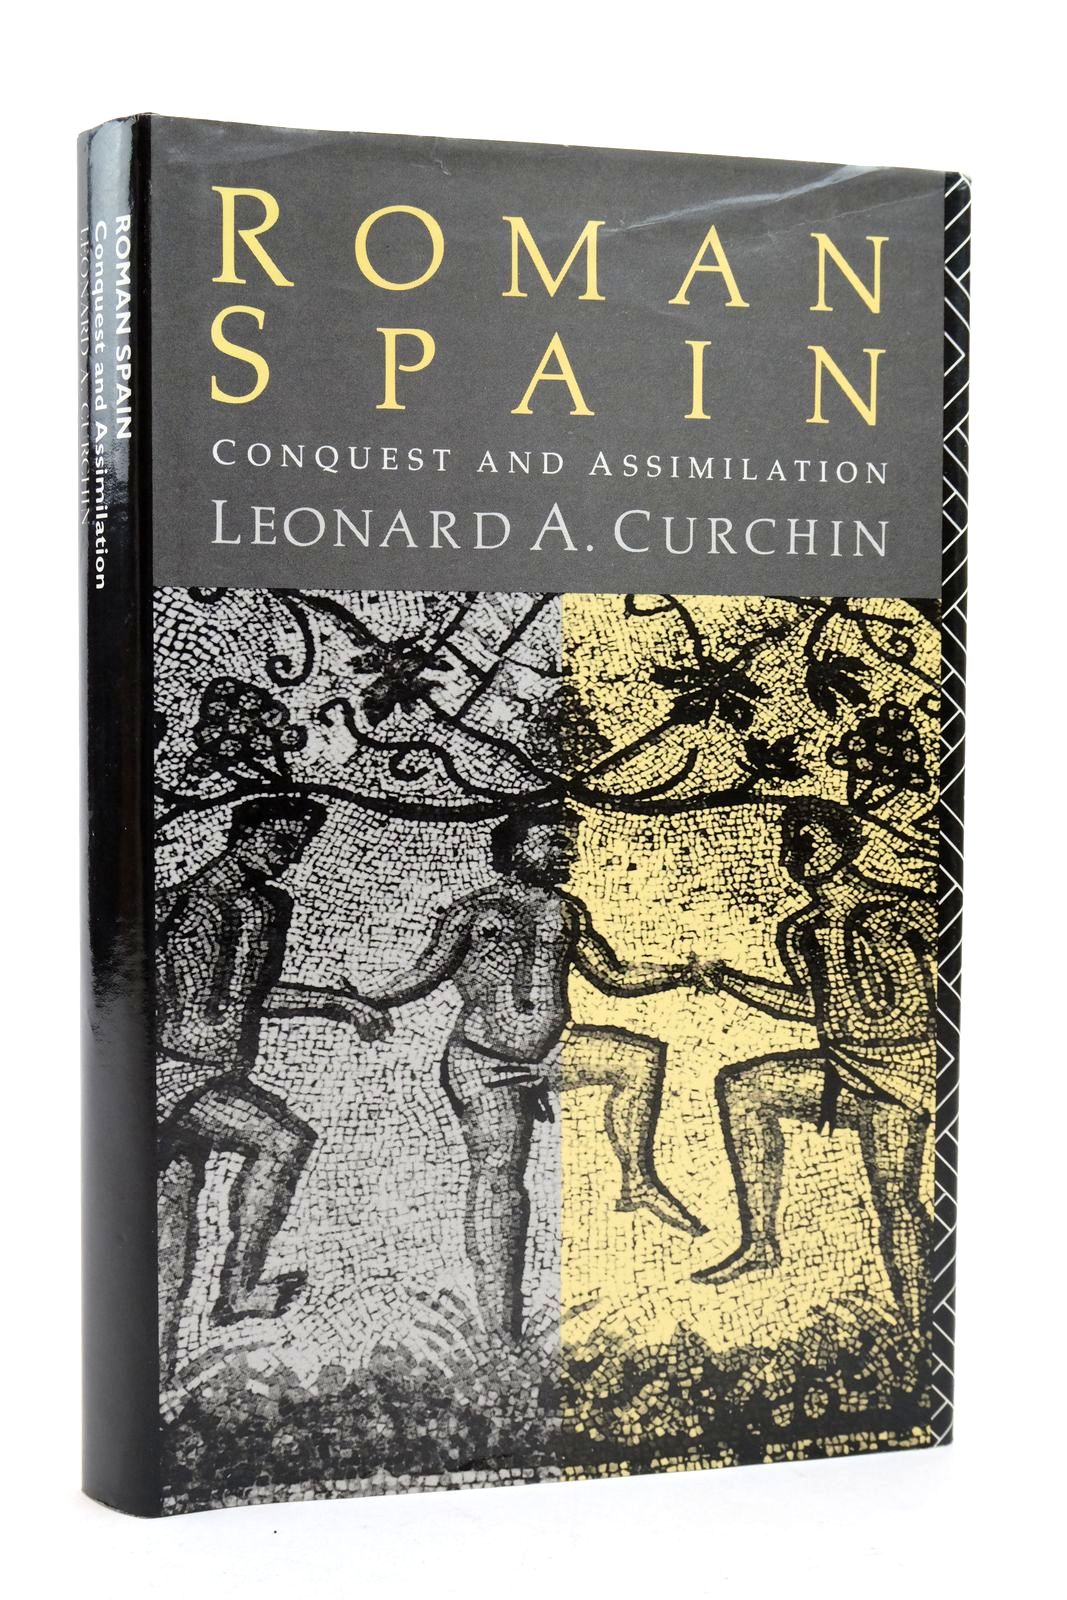 Photo of ROMAN SPAIN: CONQUEST AND ASSIMILATION written by Curchin, Leonard A. published by BCA (STOCK CODE: 2139567)  for sale by Stella & Rose's Books